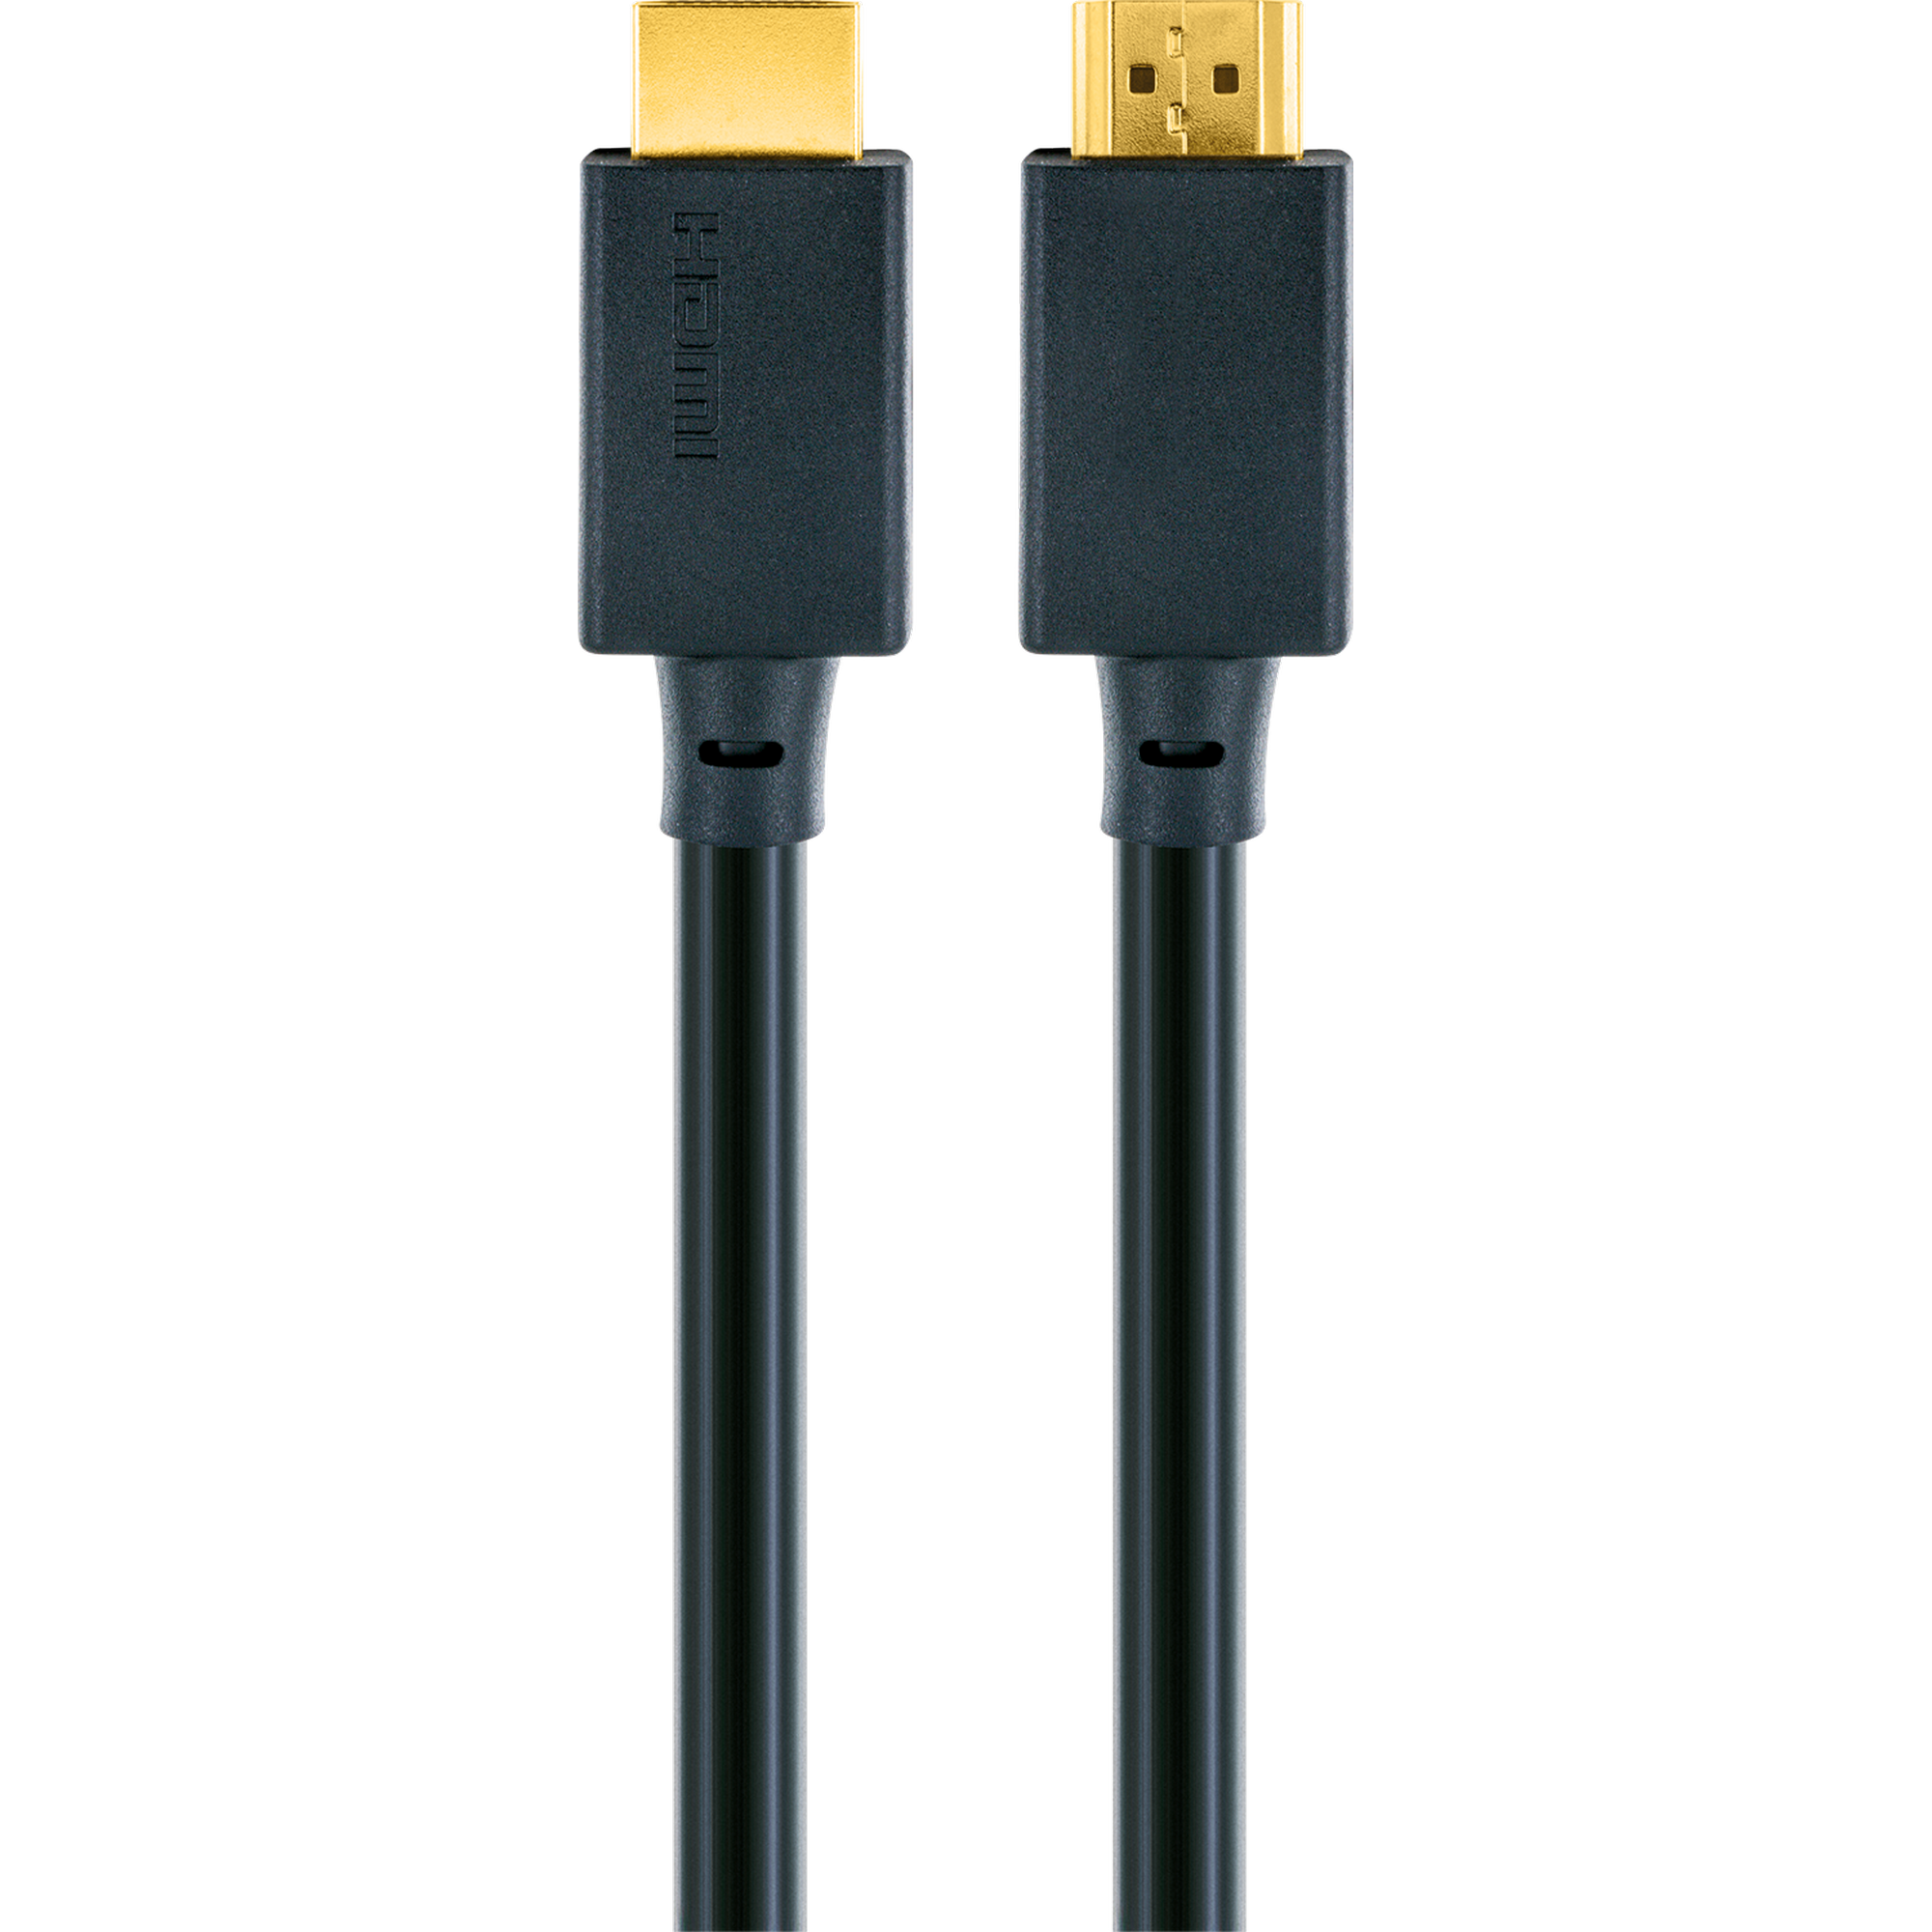 HDMI-Kabel Ultra High-Speed schwarz 1,5 m + product picture